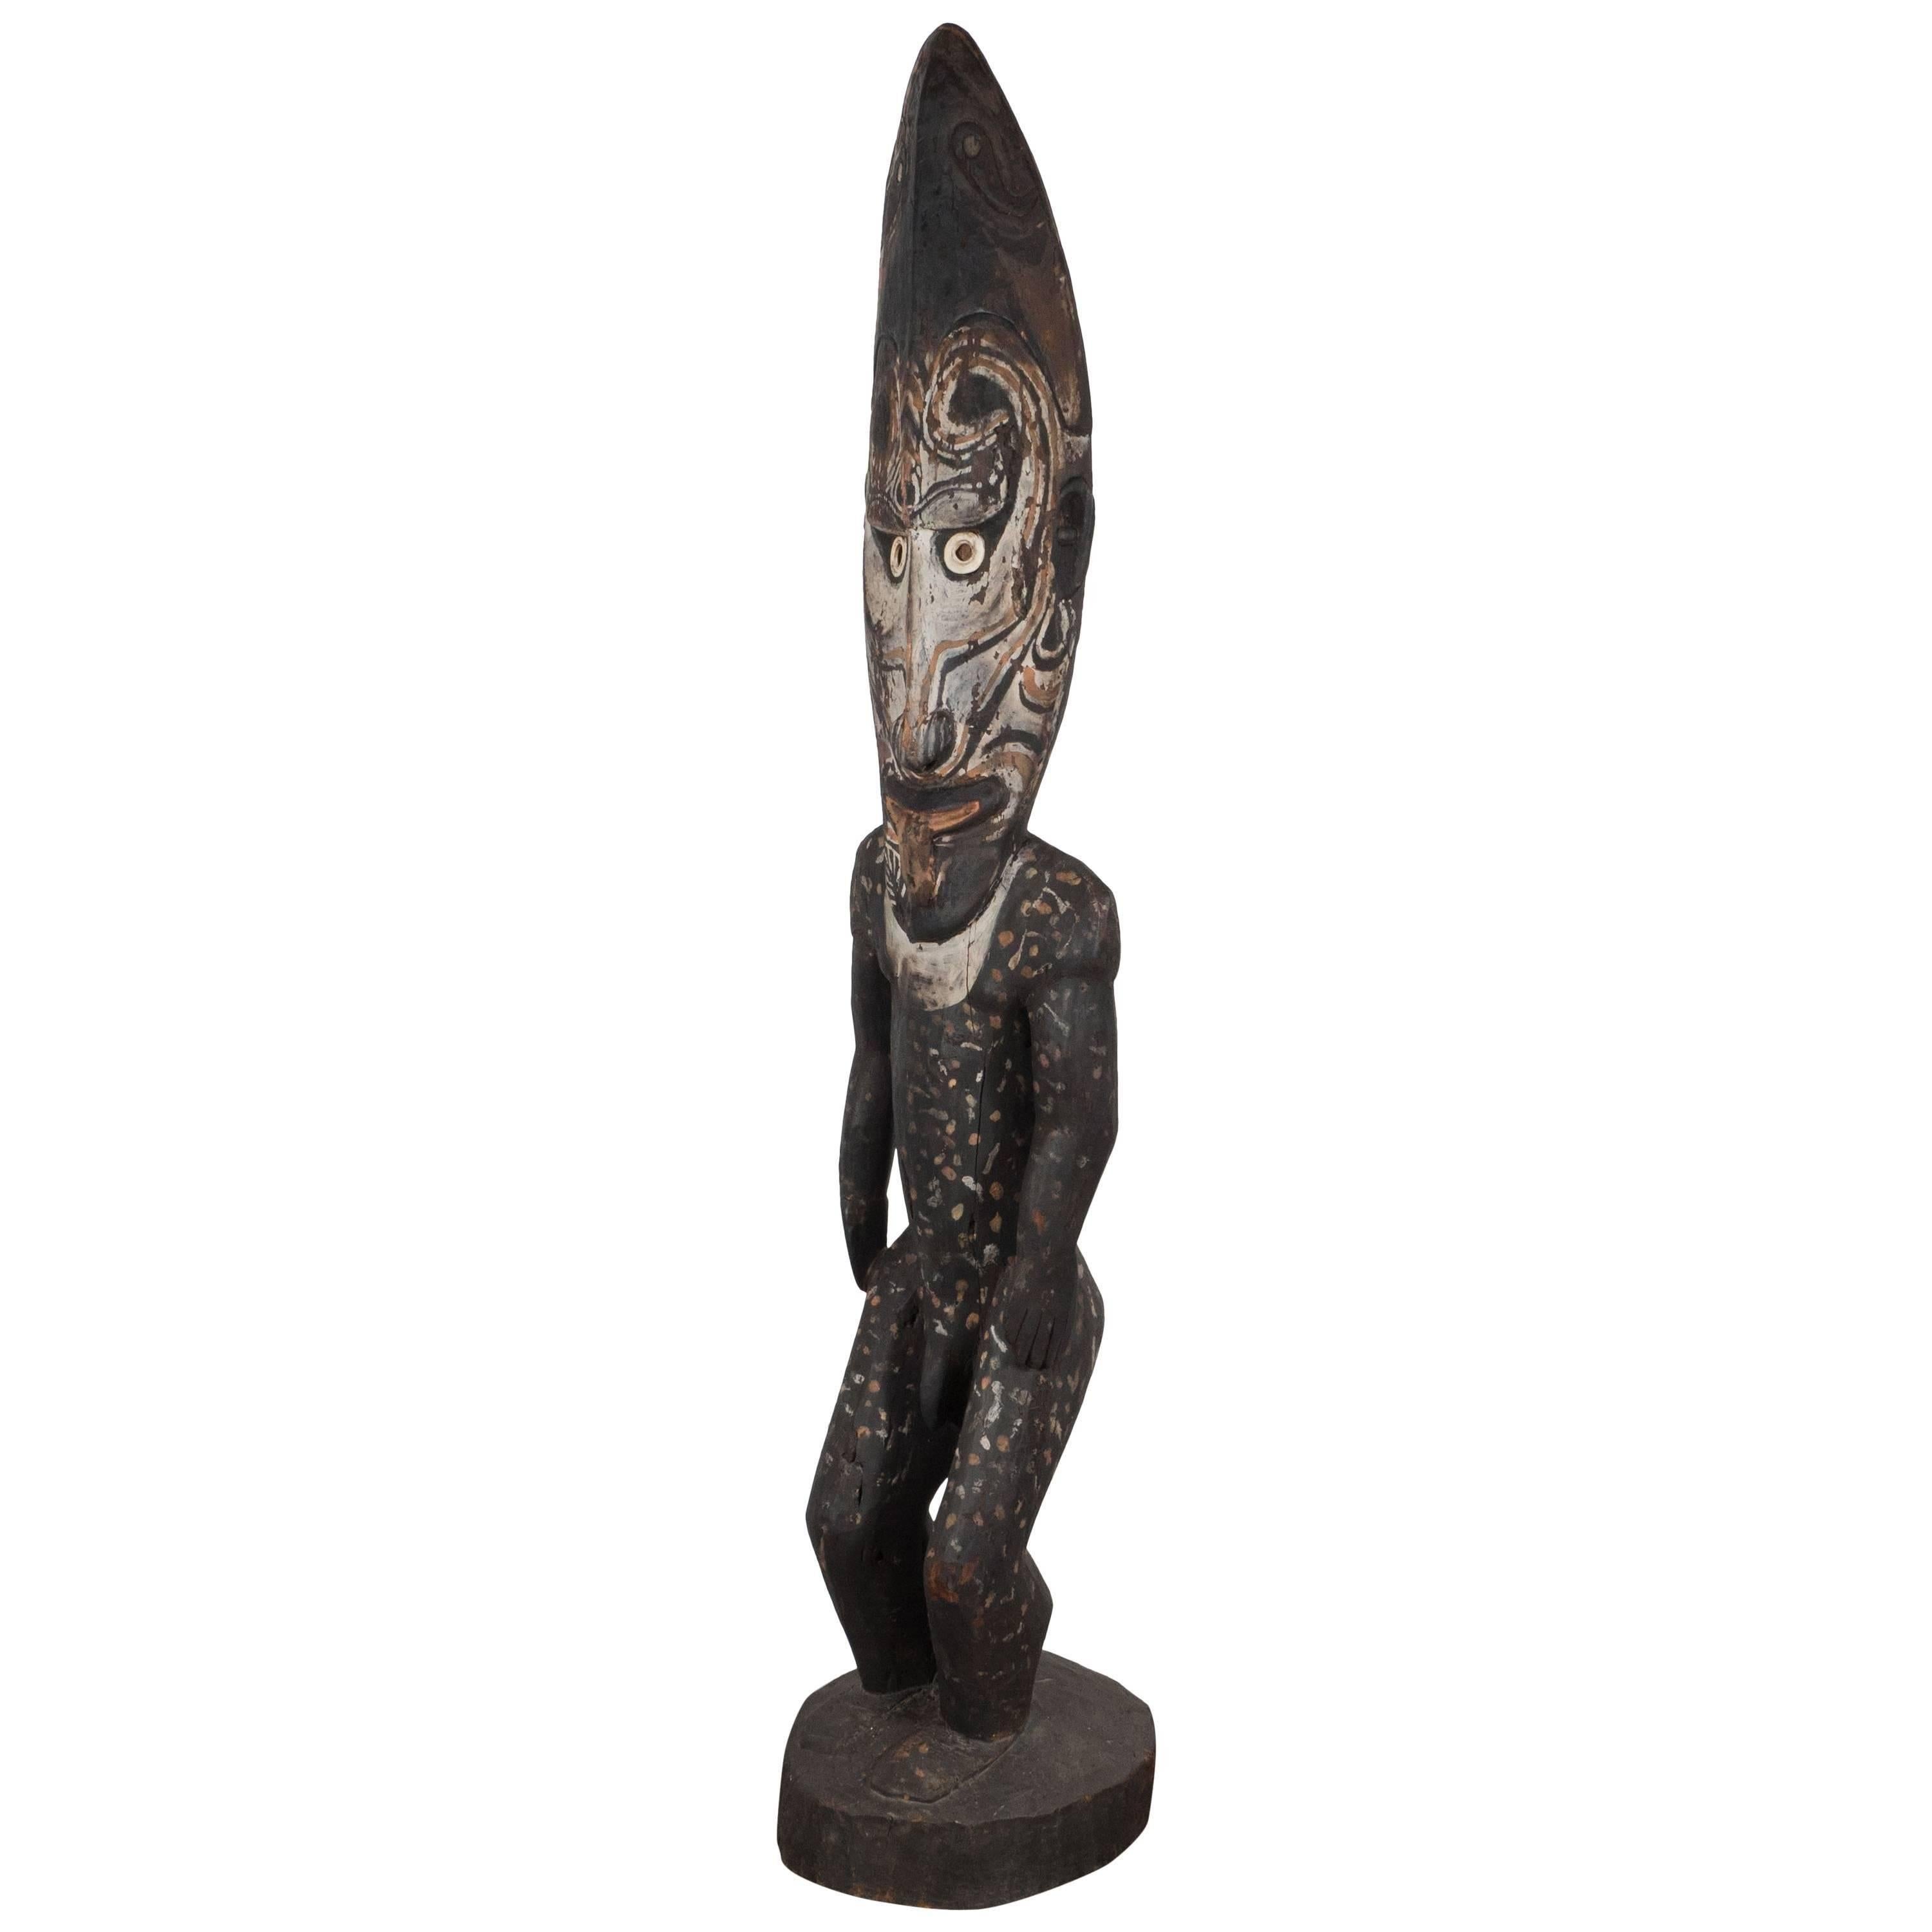 Unknown Figurative Sculpture - Large Carved and Painted Wood Spirit Figure Papua New Guinea, Late 19th Century